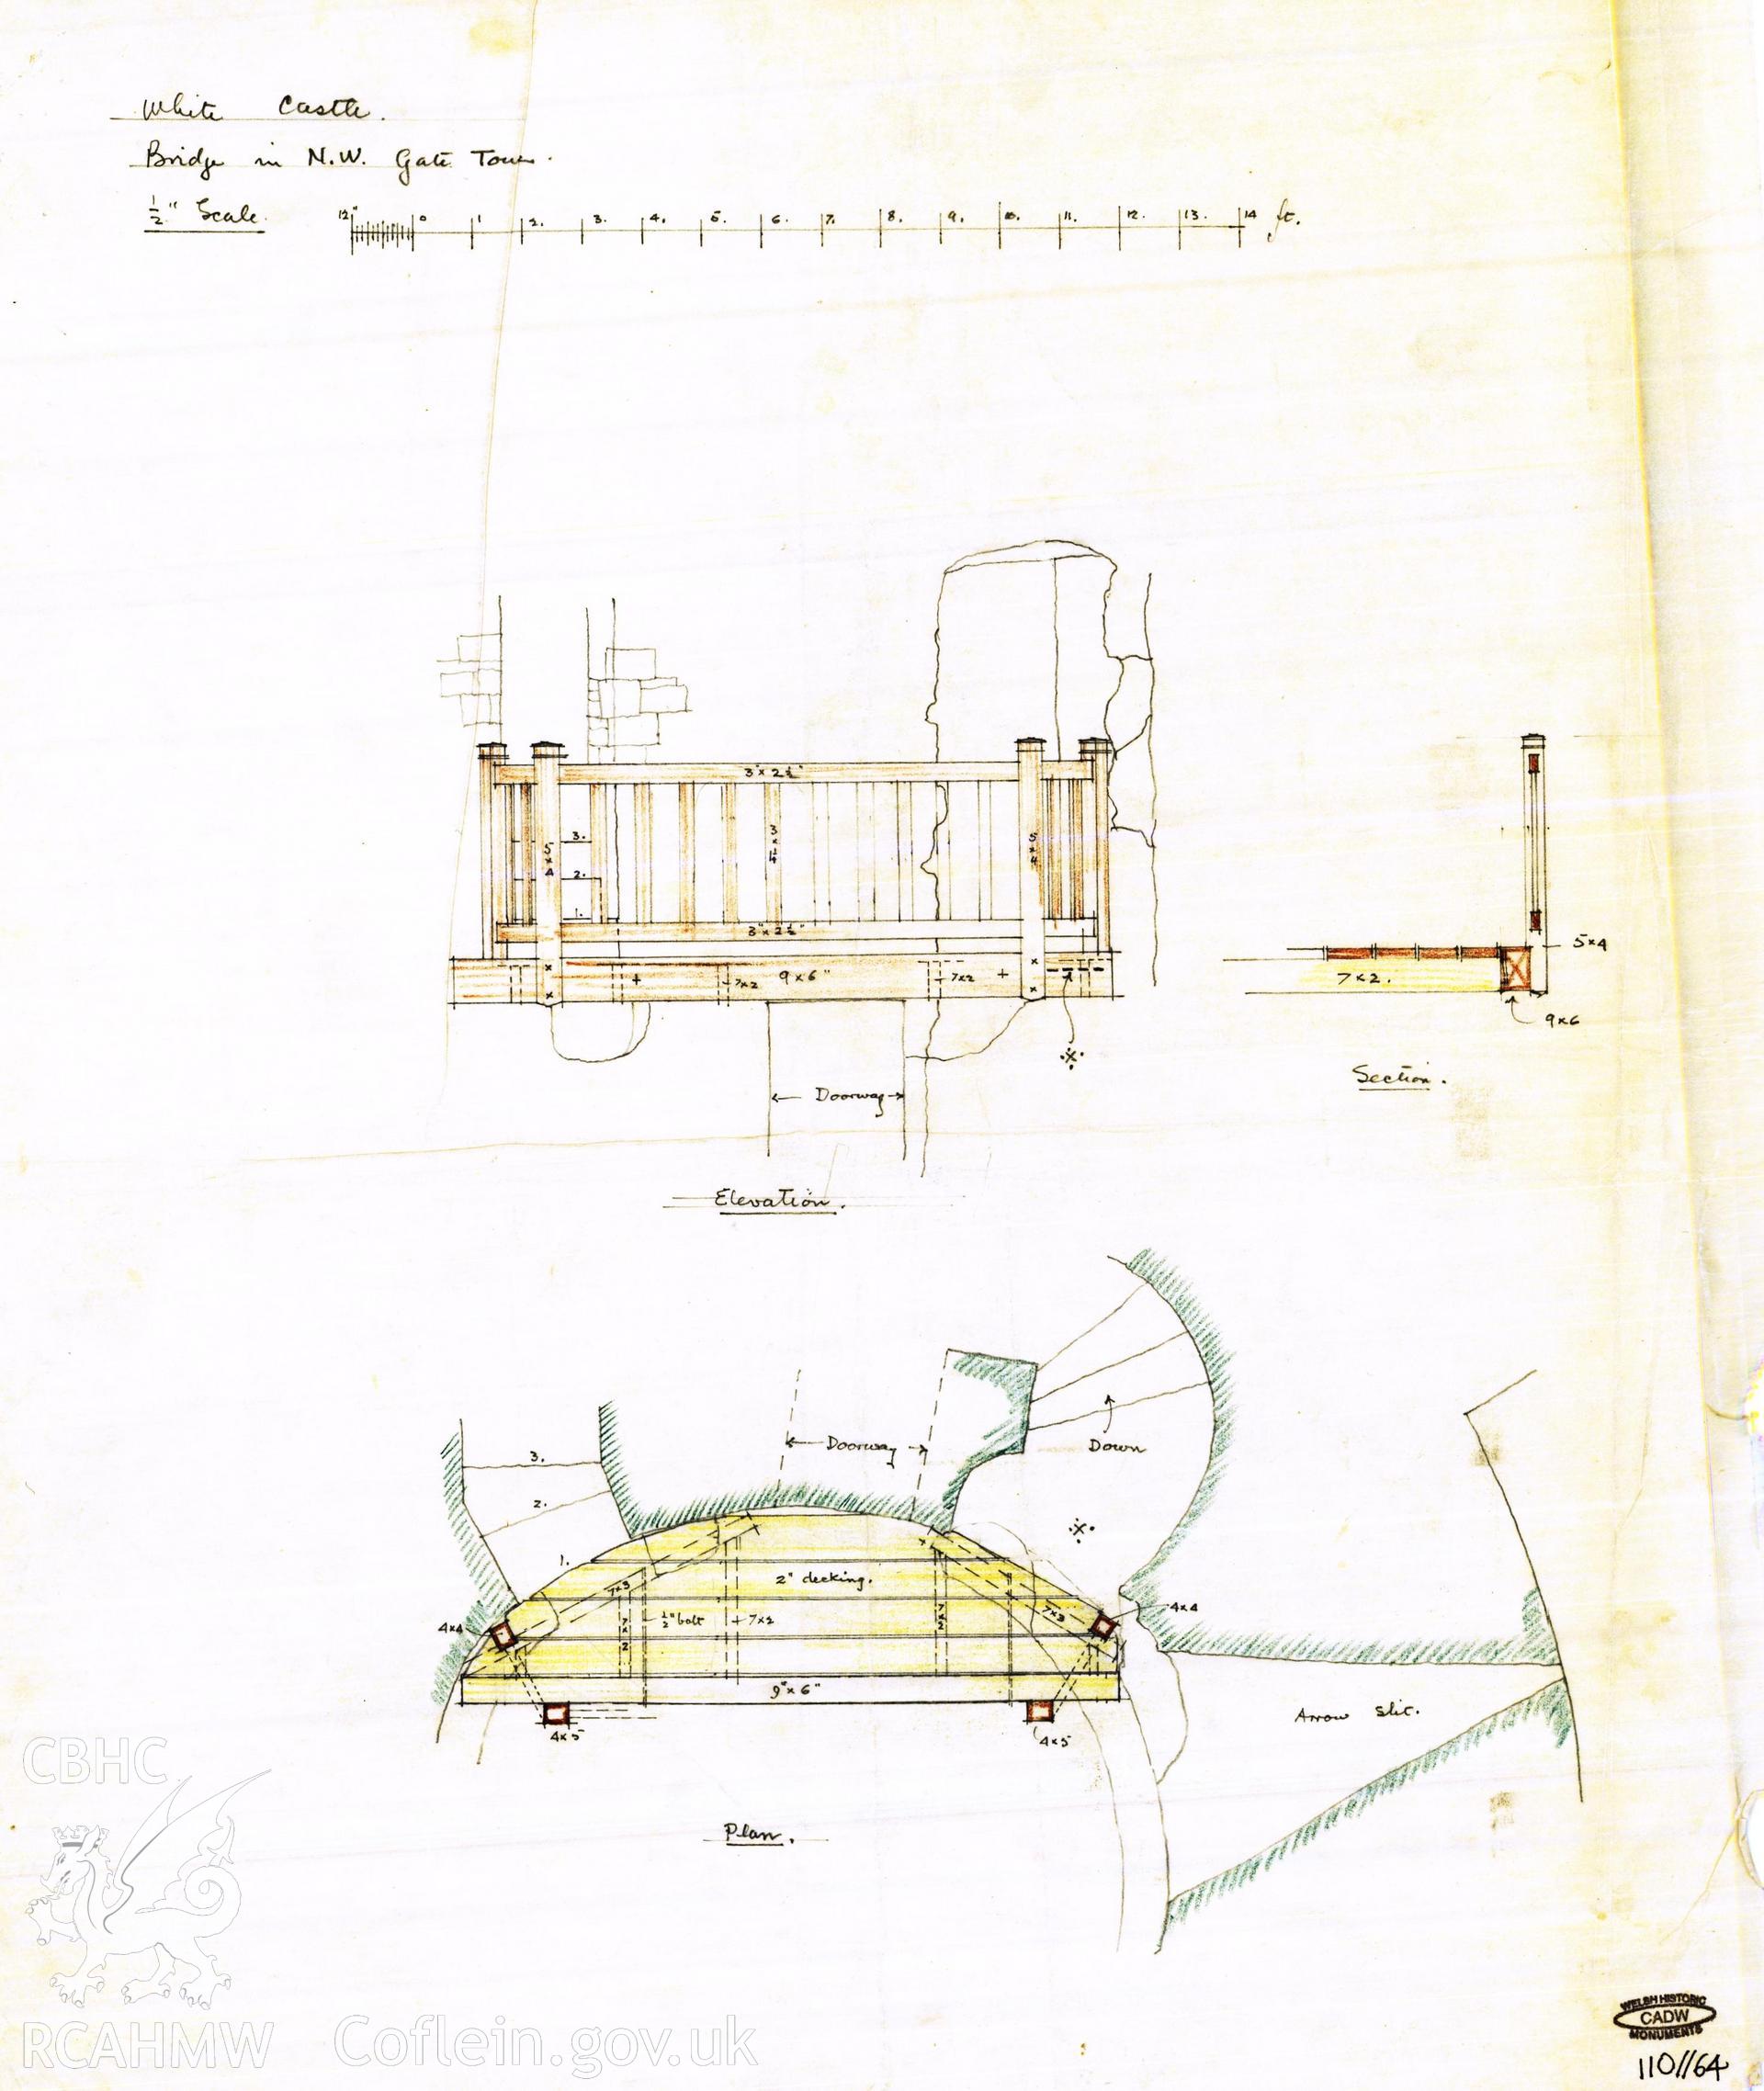 Cadw guardianship monument drawing of White Castle. Inner gate W tower, lower bridge. Cadw Ref. No:110//64. Scale 1:24.